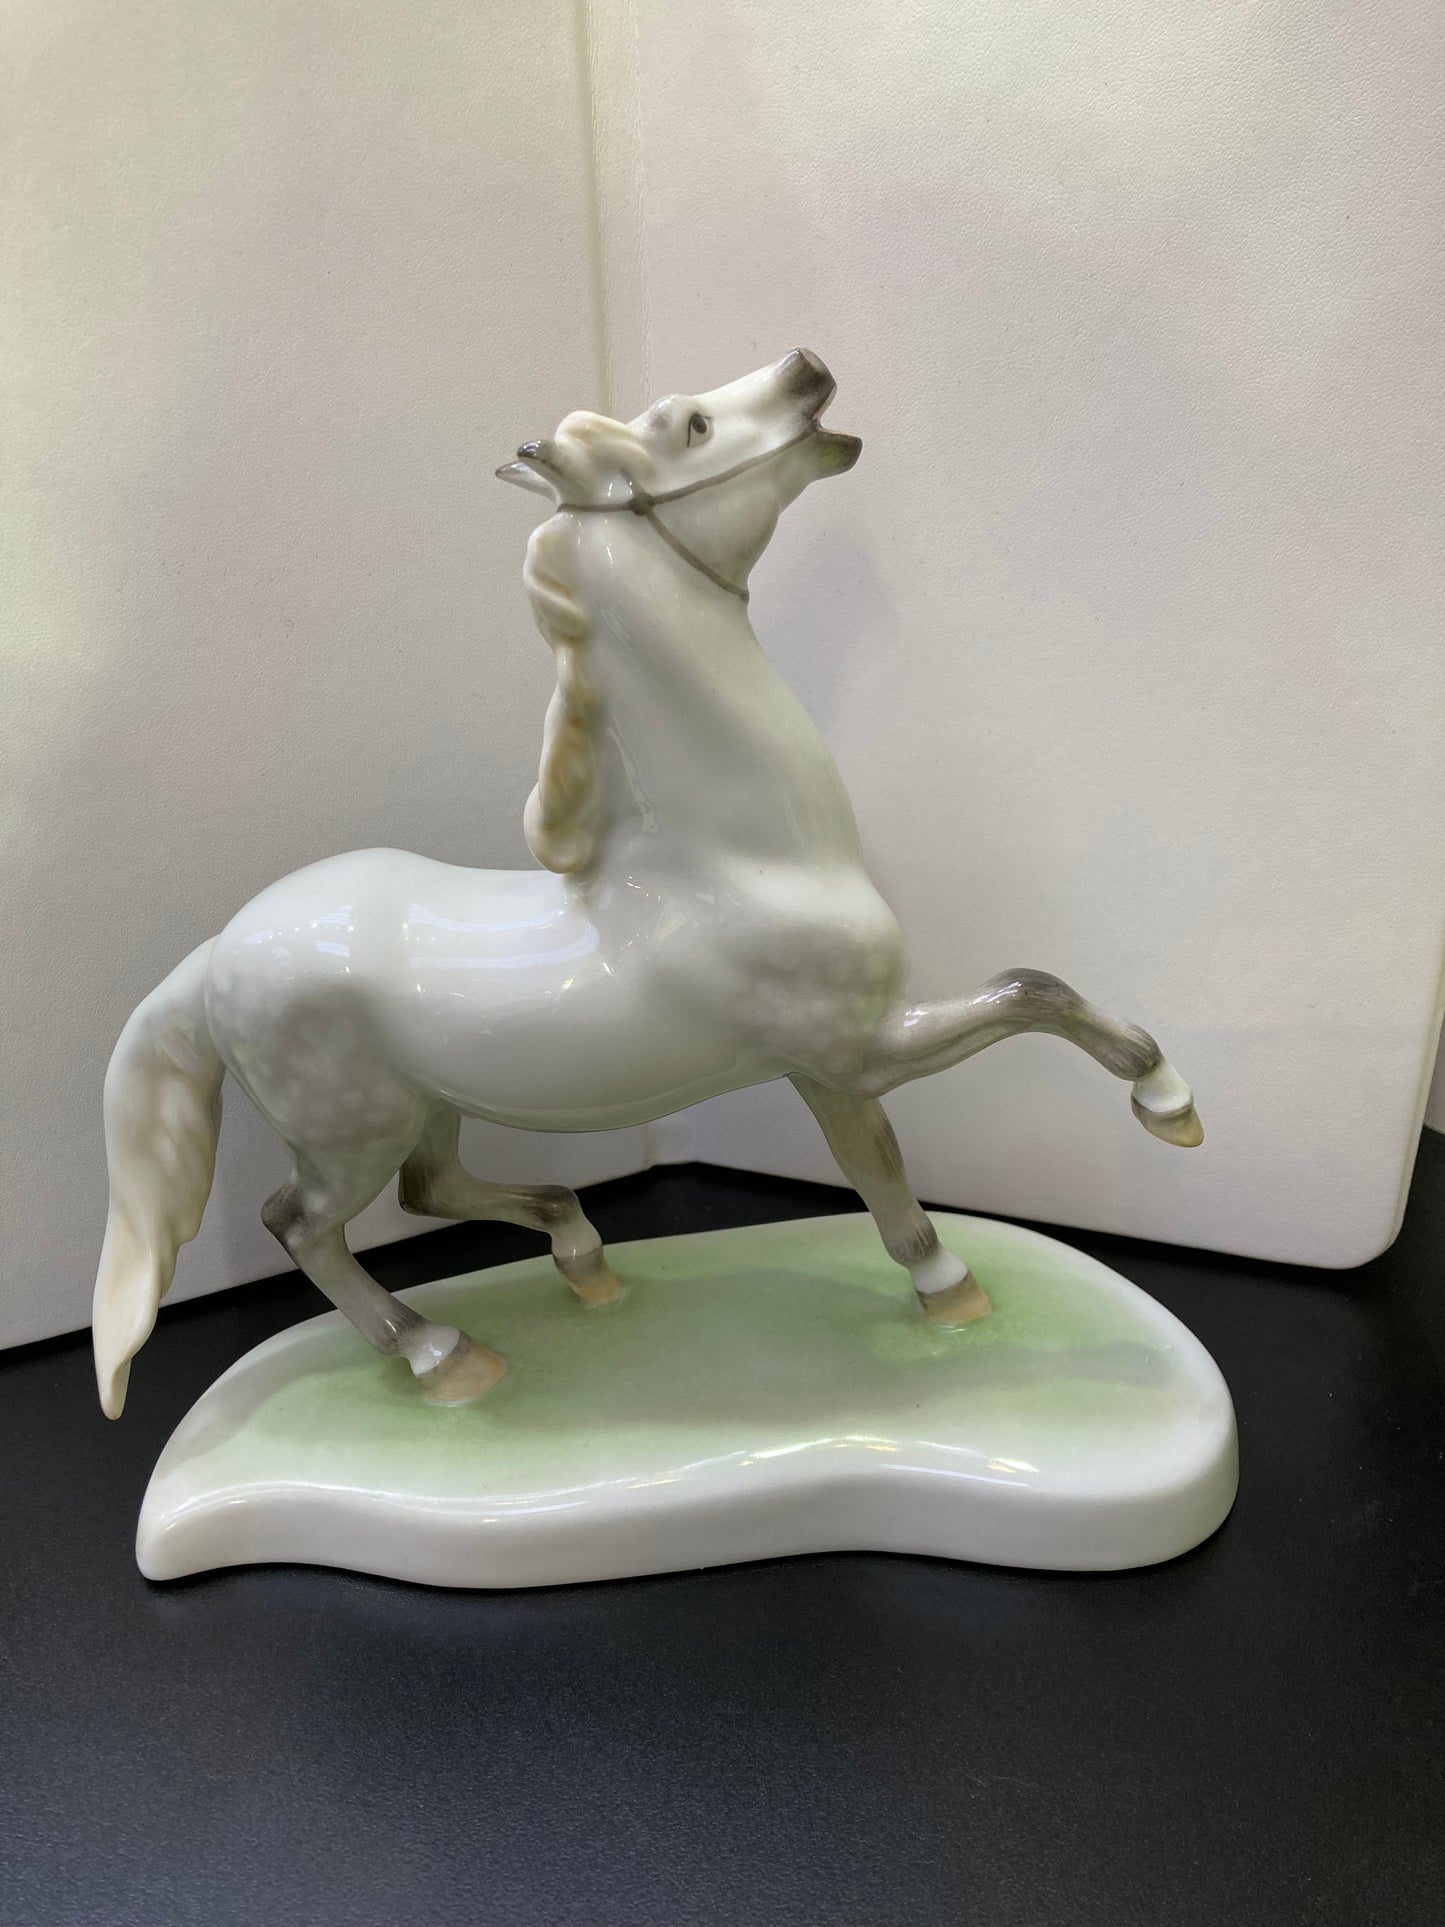 Herend horse porcelain figurines from Hungary.